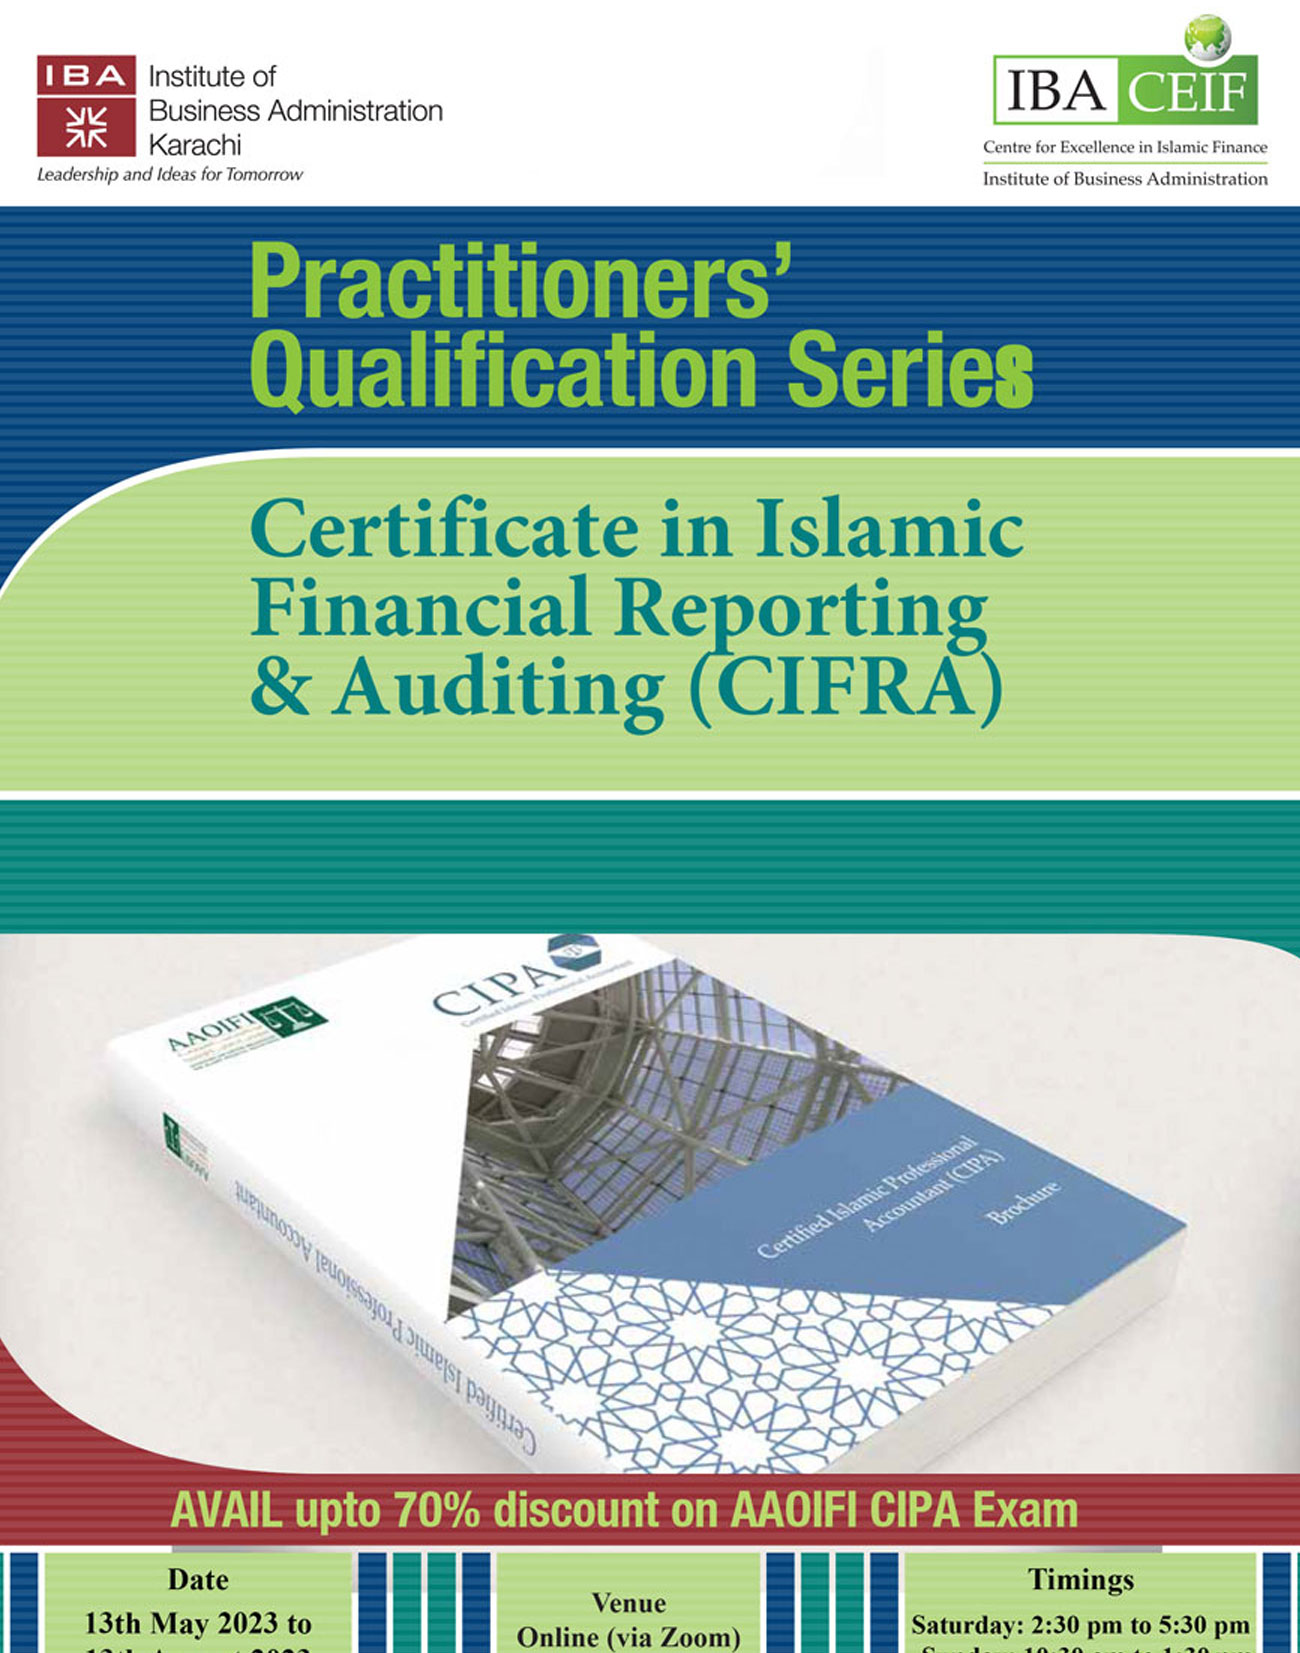 Islamic Finance and its application in branch operations